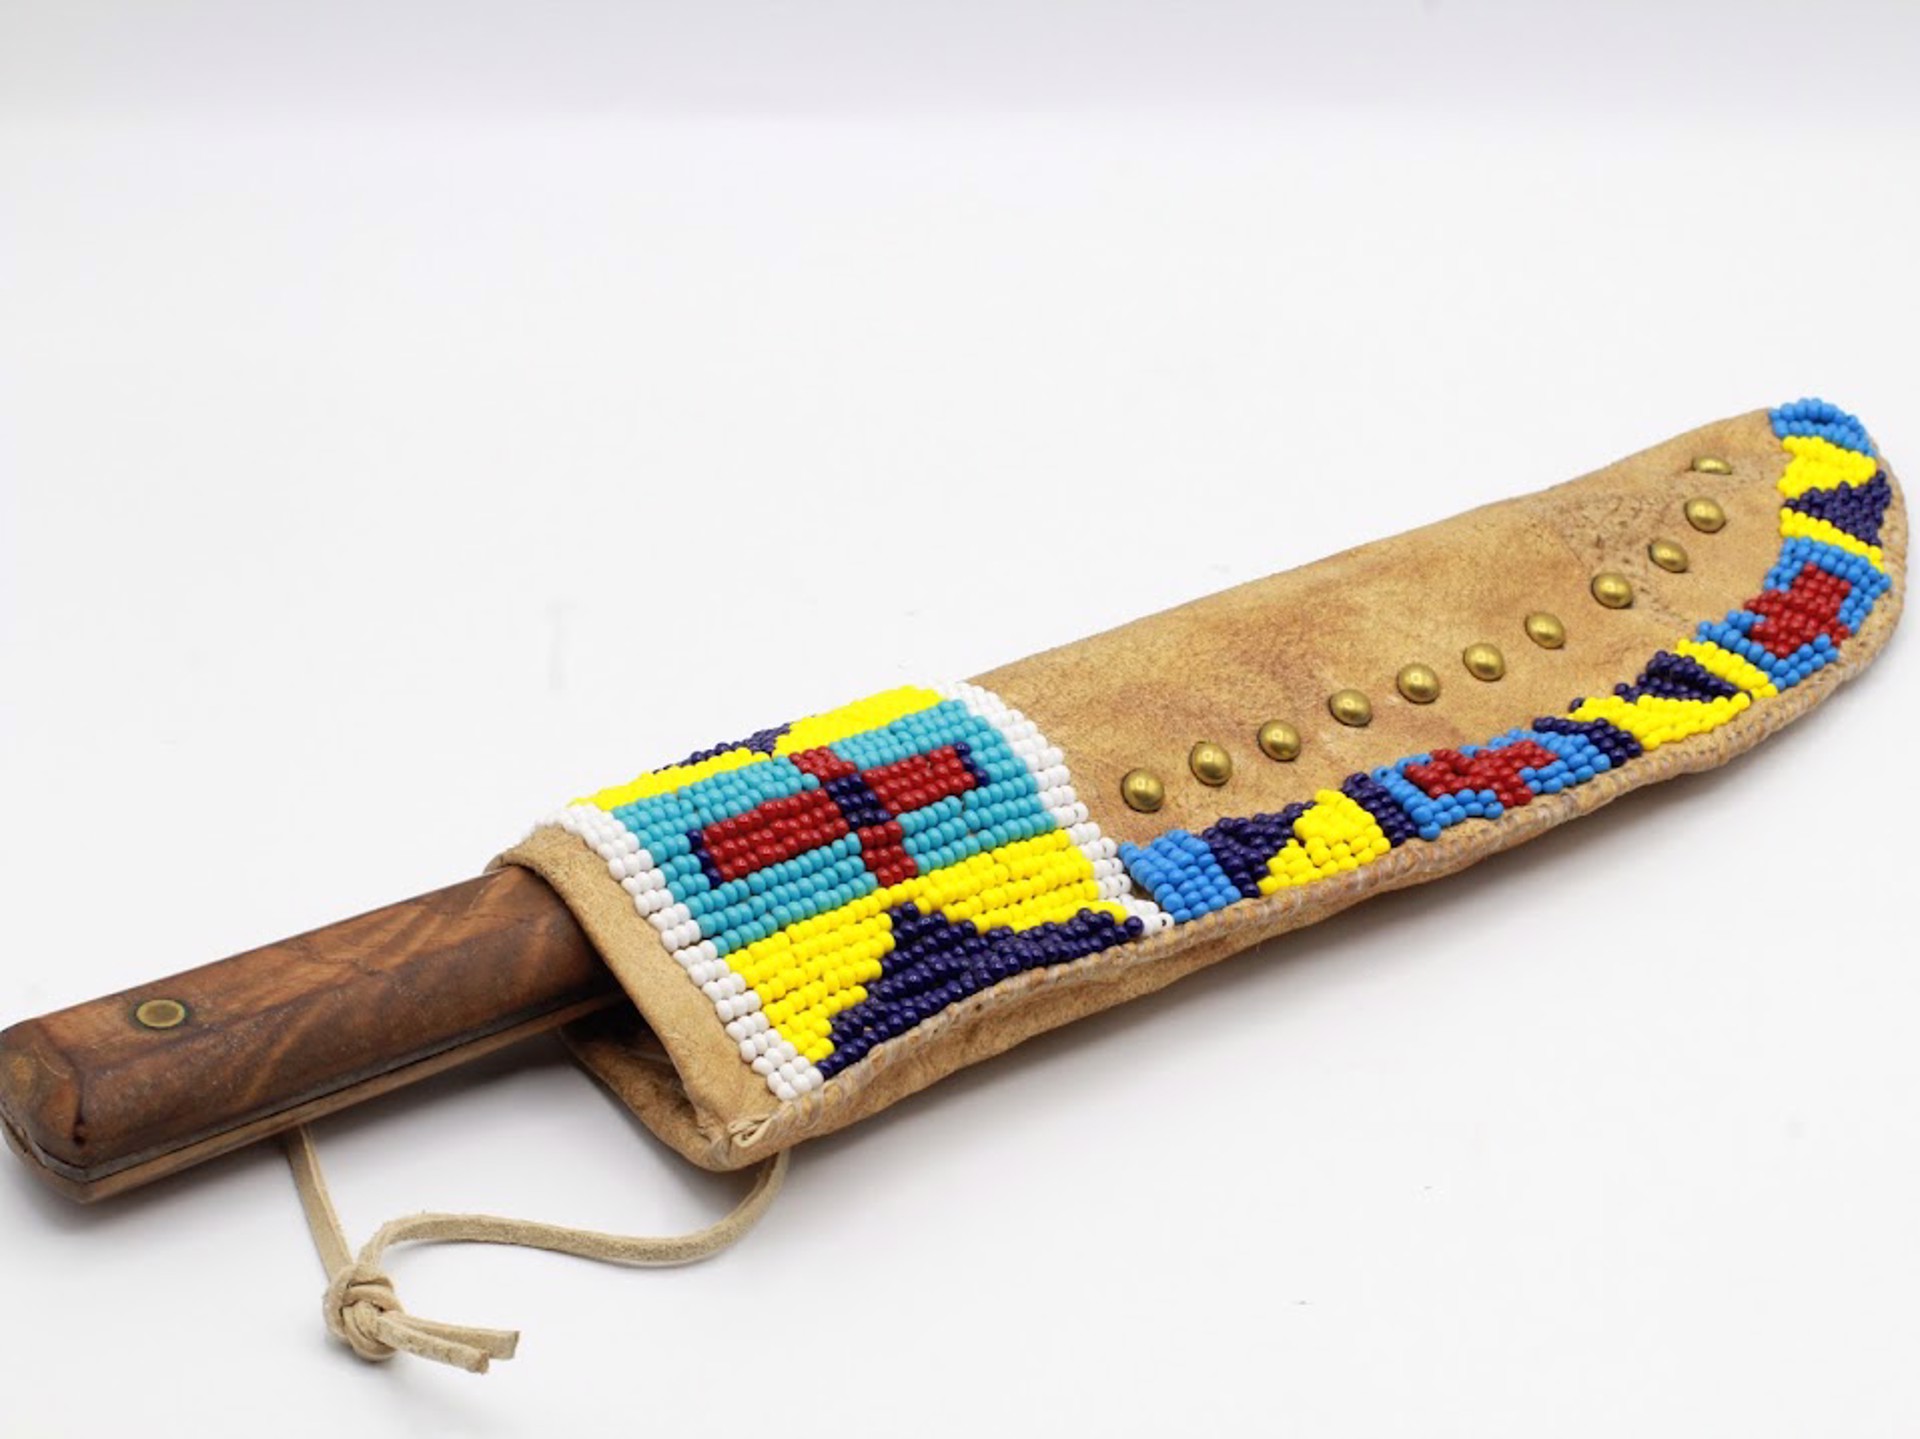 Northern Plains Indian Knife and Sheath by Mark Collins